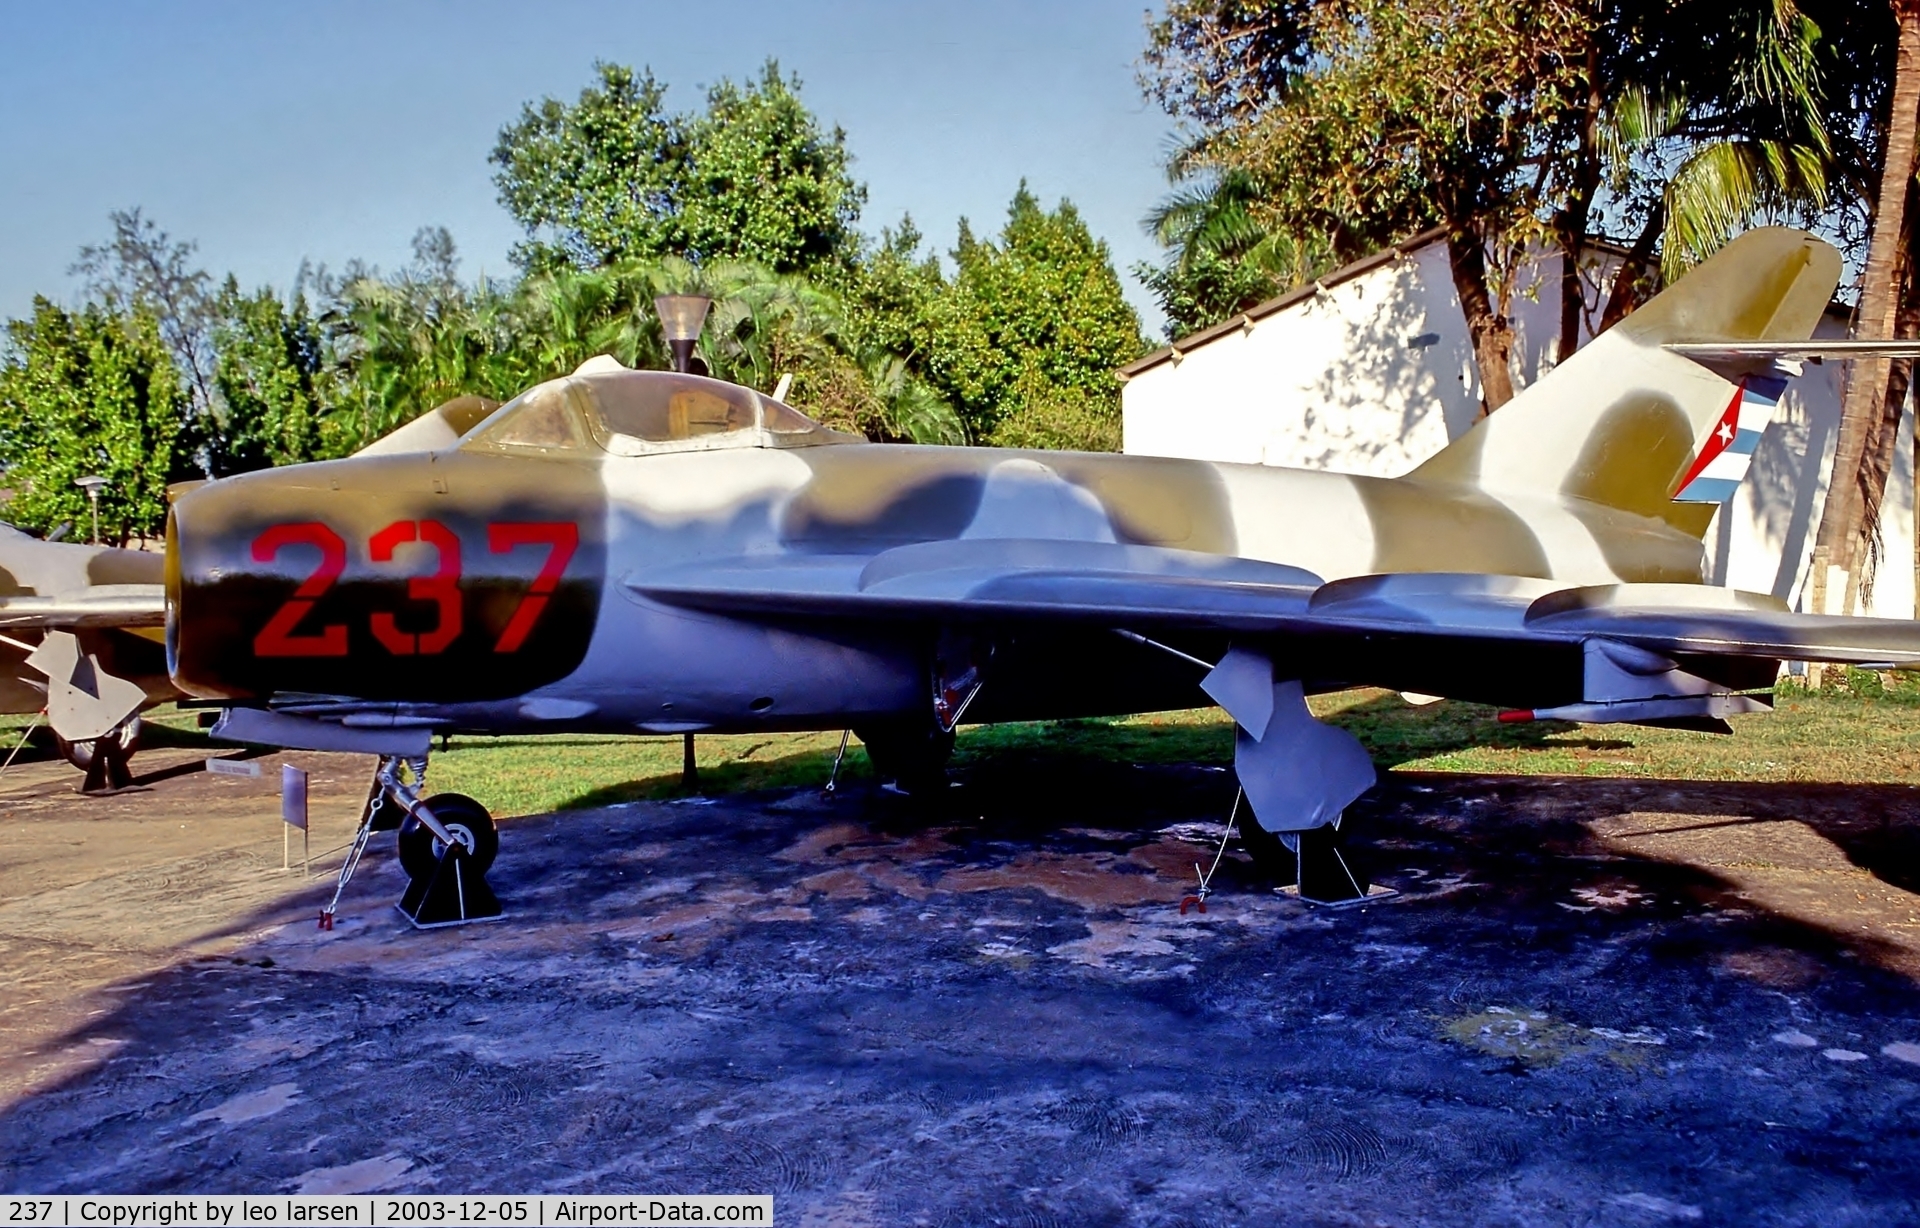 237, Mikoyan-Gurevich MiG-17AS C/N Not found 237, Museo del Aire Havana 5.12.03